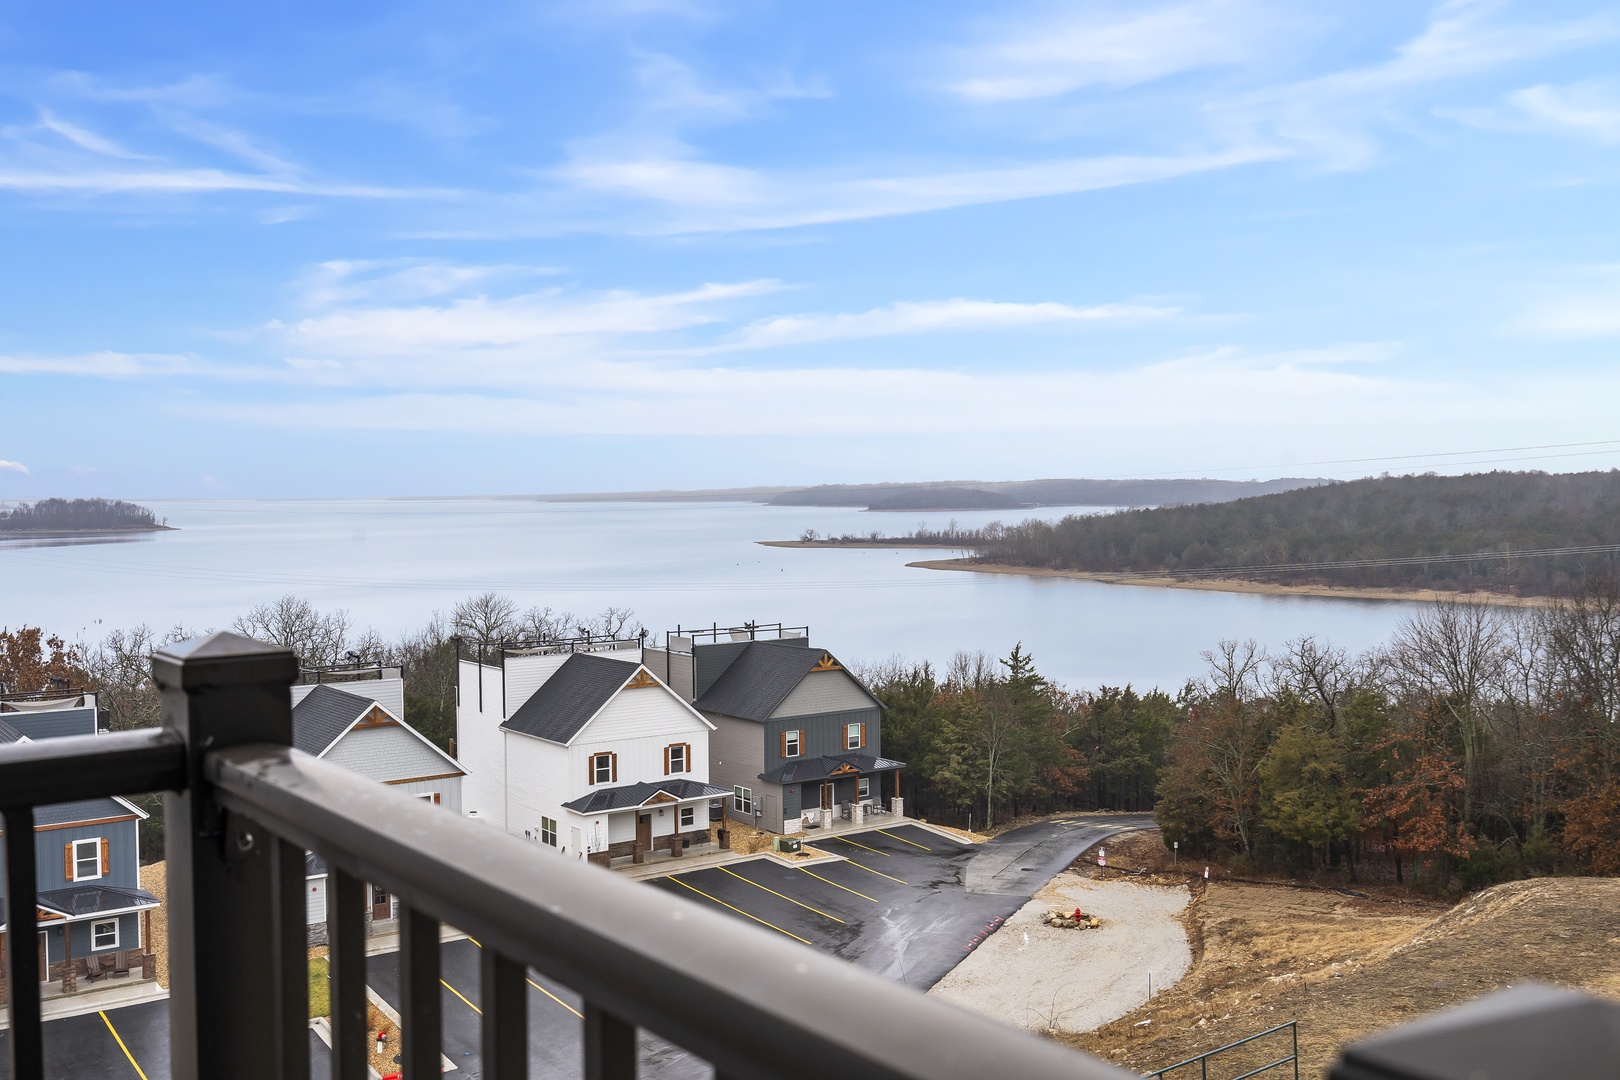 Step out onto the balcony & soak in the stunning lake views